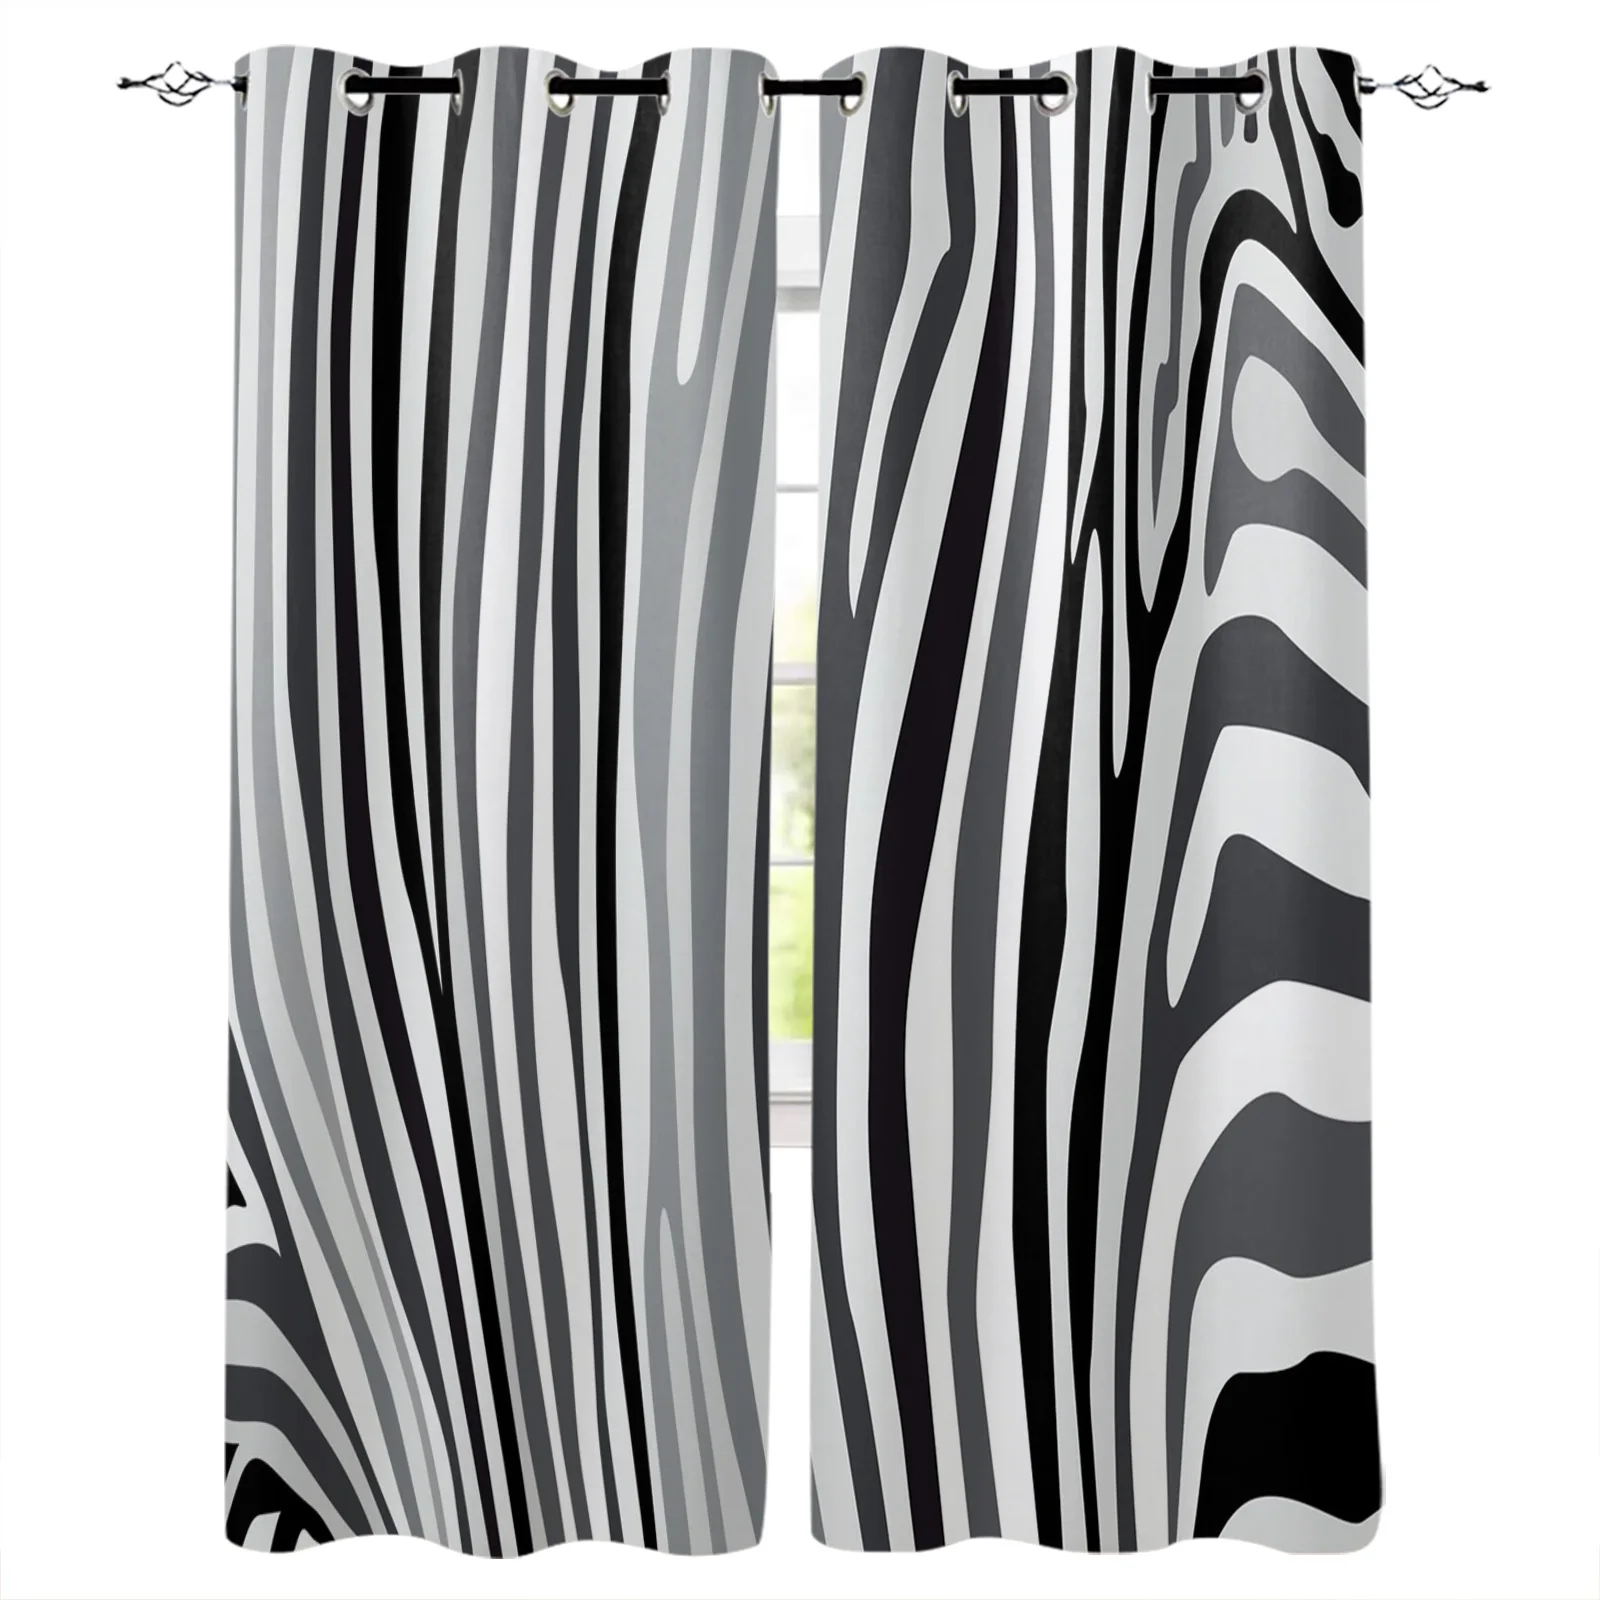 

Zebra Black And White Stripes Blackout Curtains Window Curtains For Bedroom Living Room Decor Window Treatments